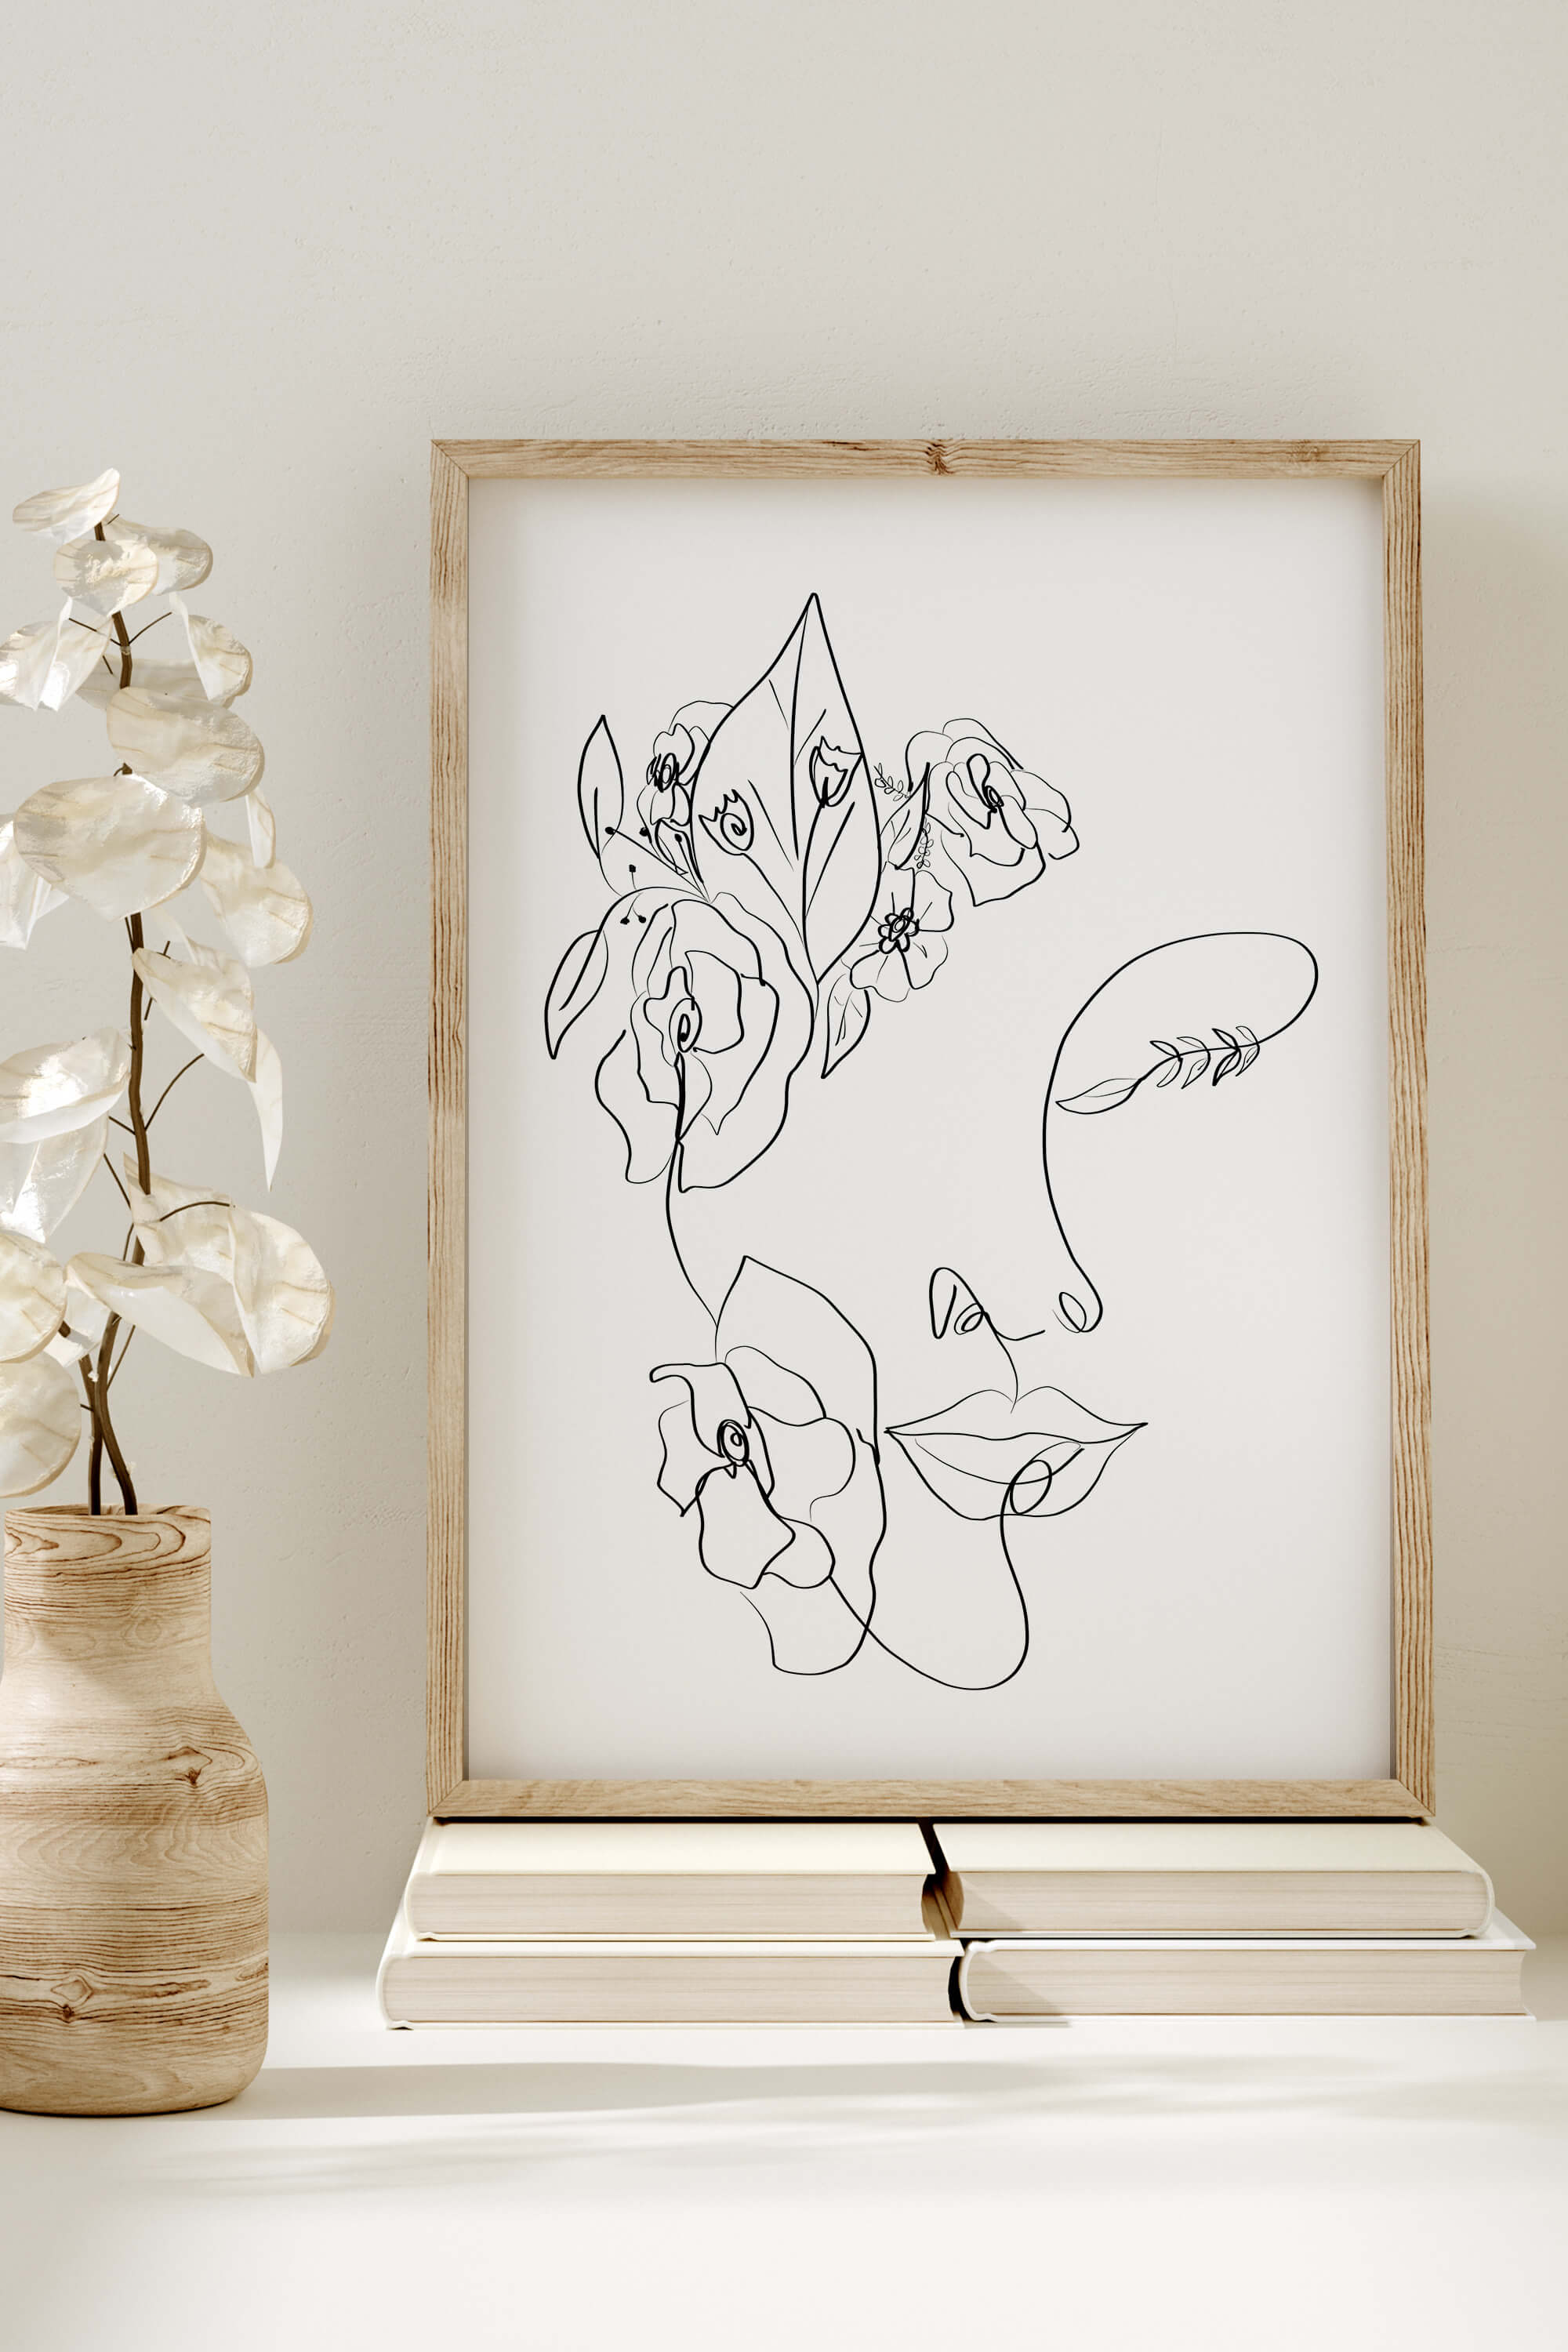 Immerse yourself in modern aesthetics with this floral women line art print. The contemporary design meets timeless appeal, offering a graceful depiction of femininity.